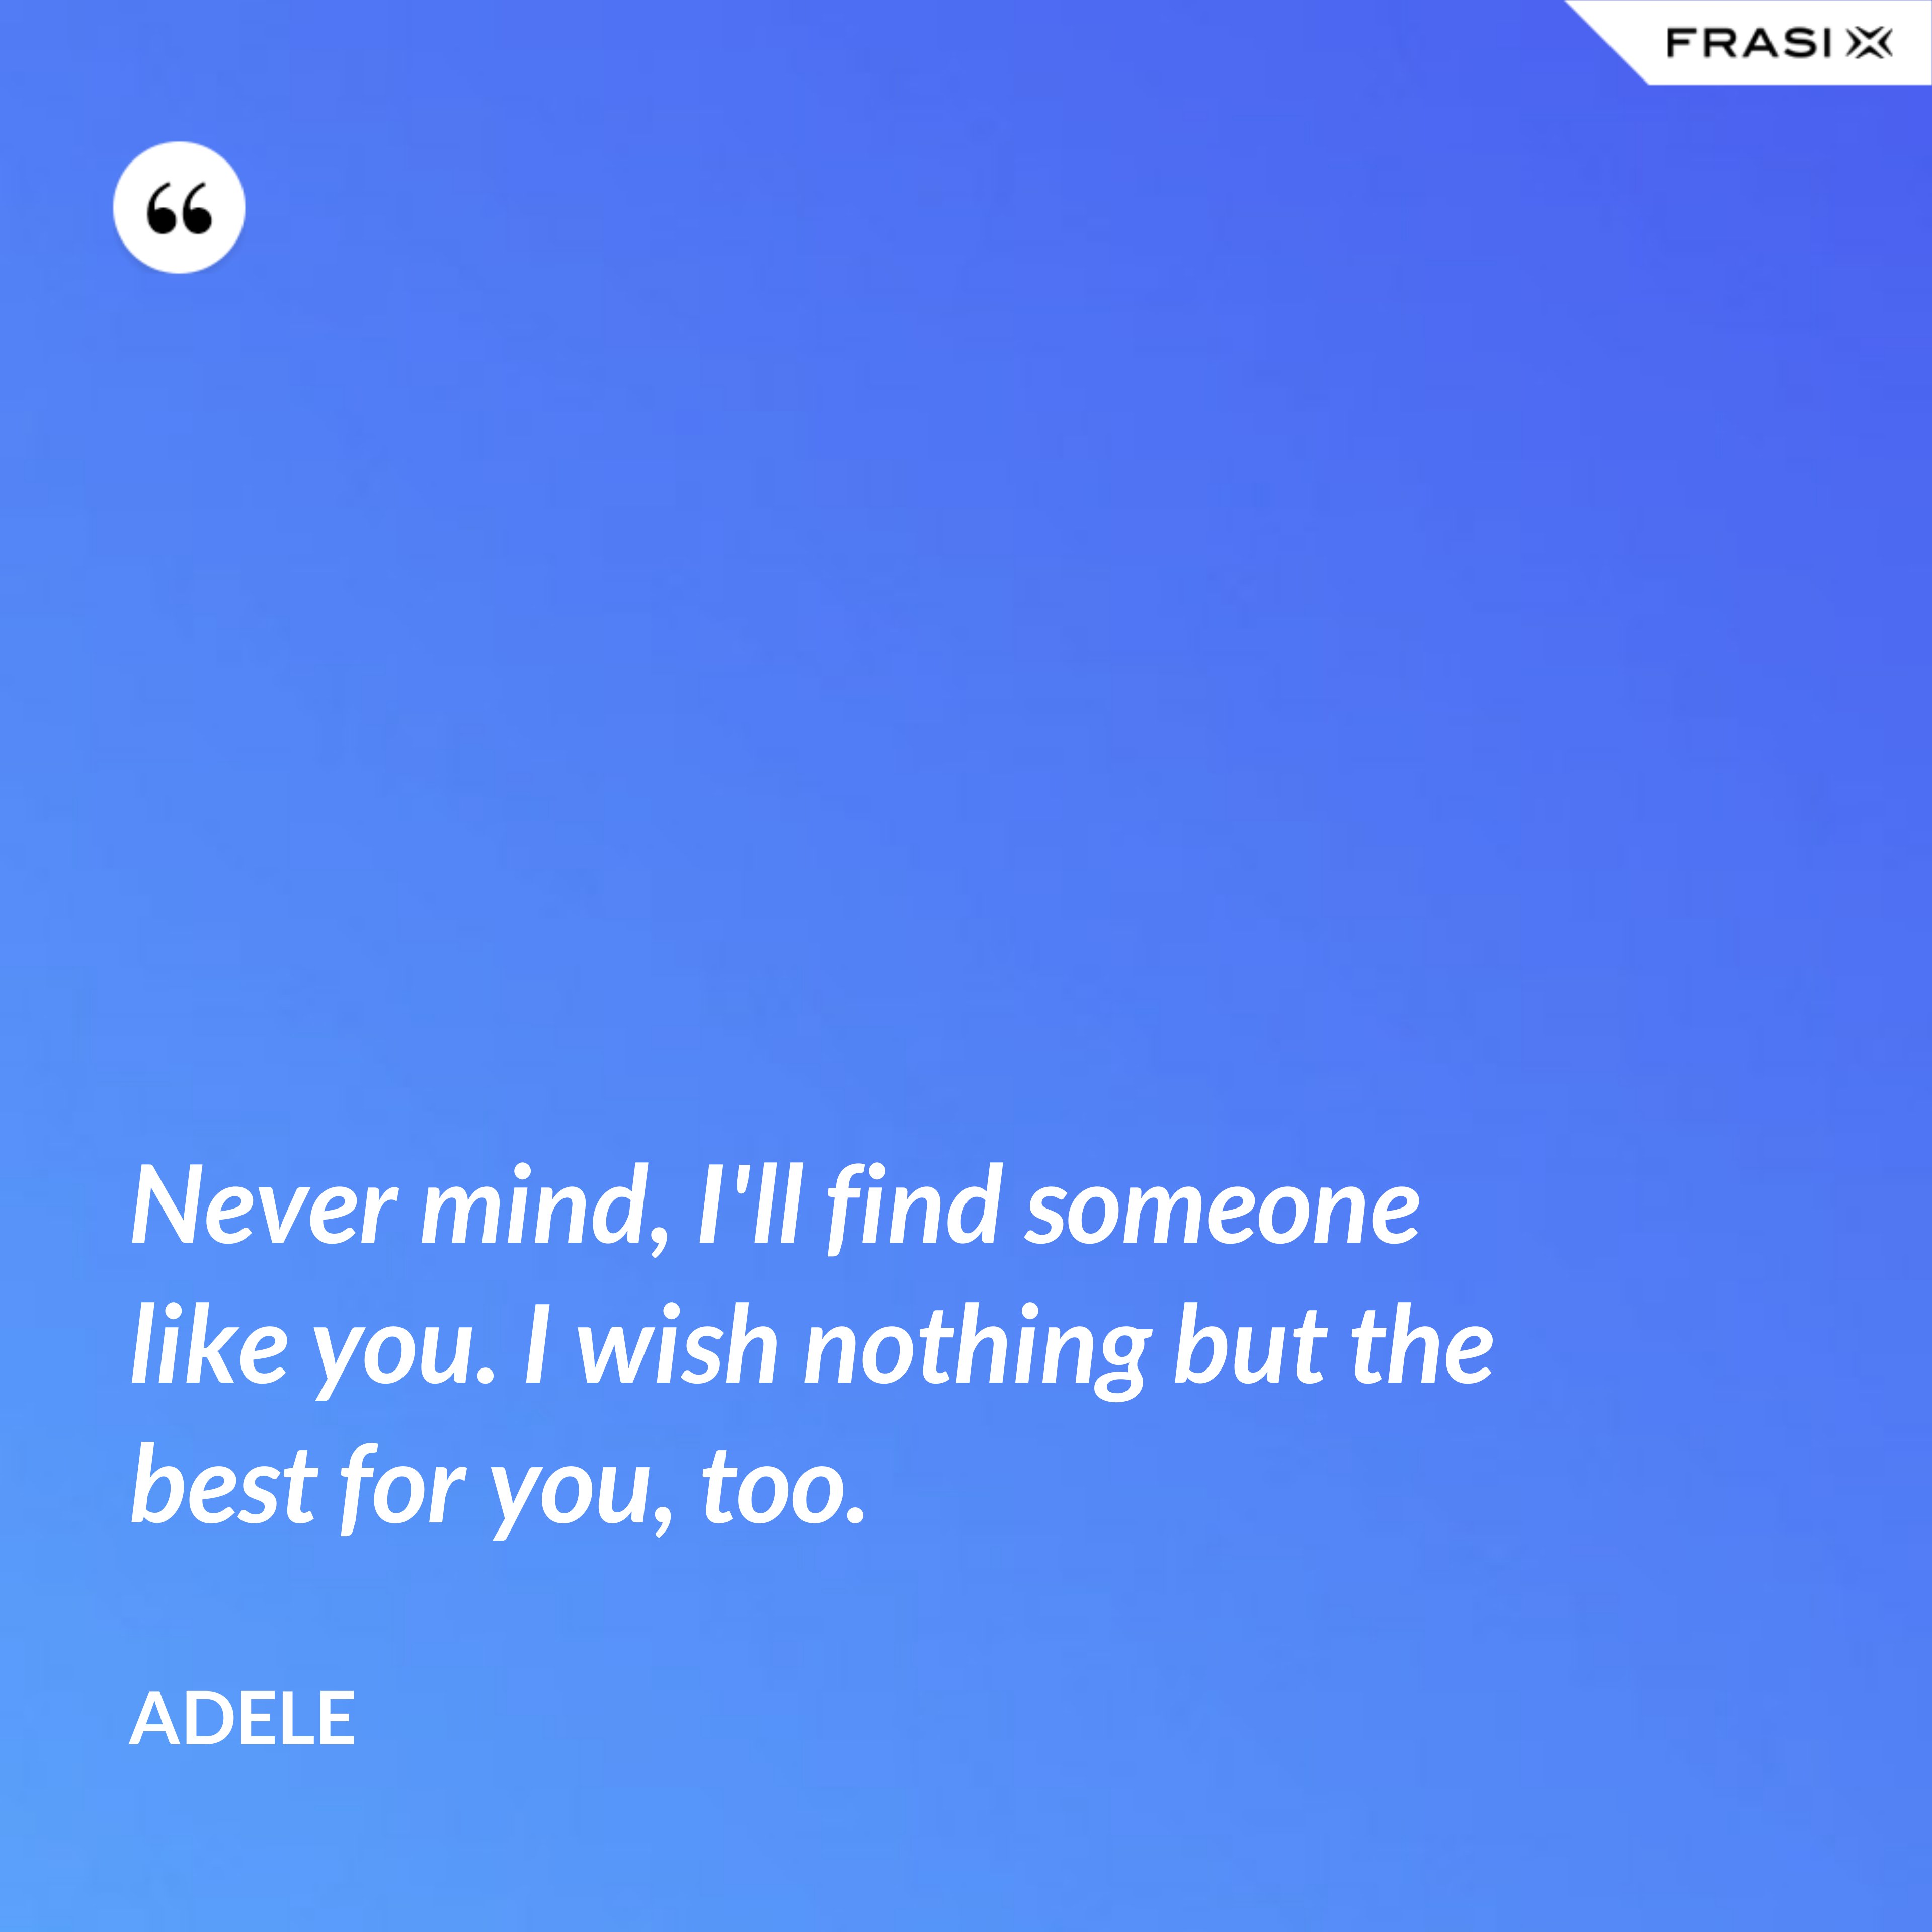 Never mind, I'll find someone like you. I wish nothing but the best for you, too. - Adele